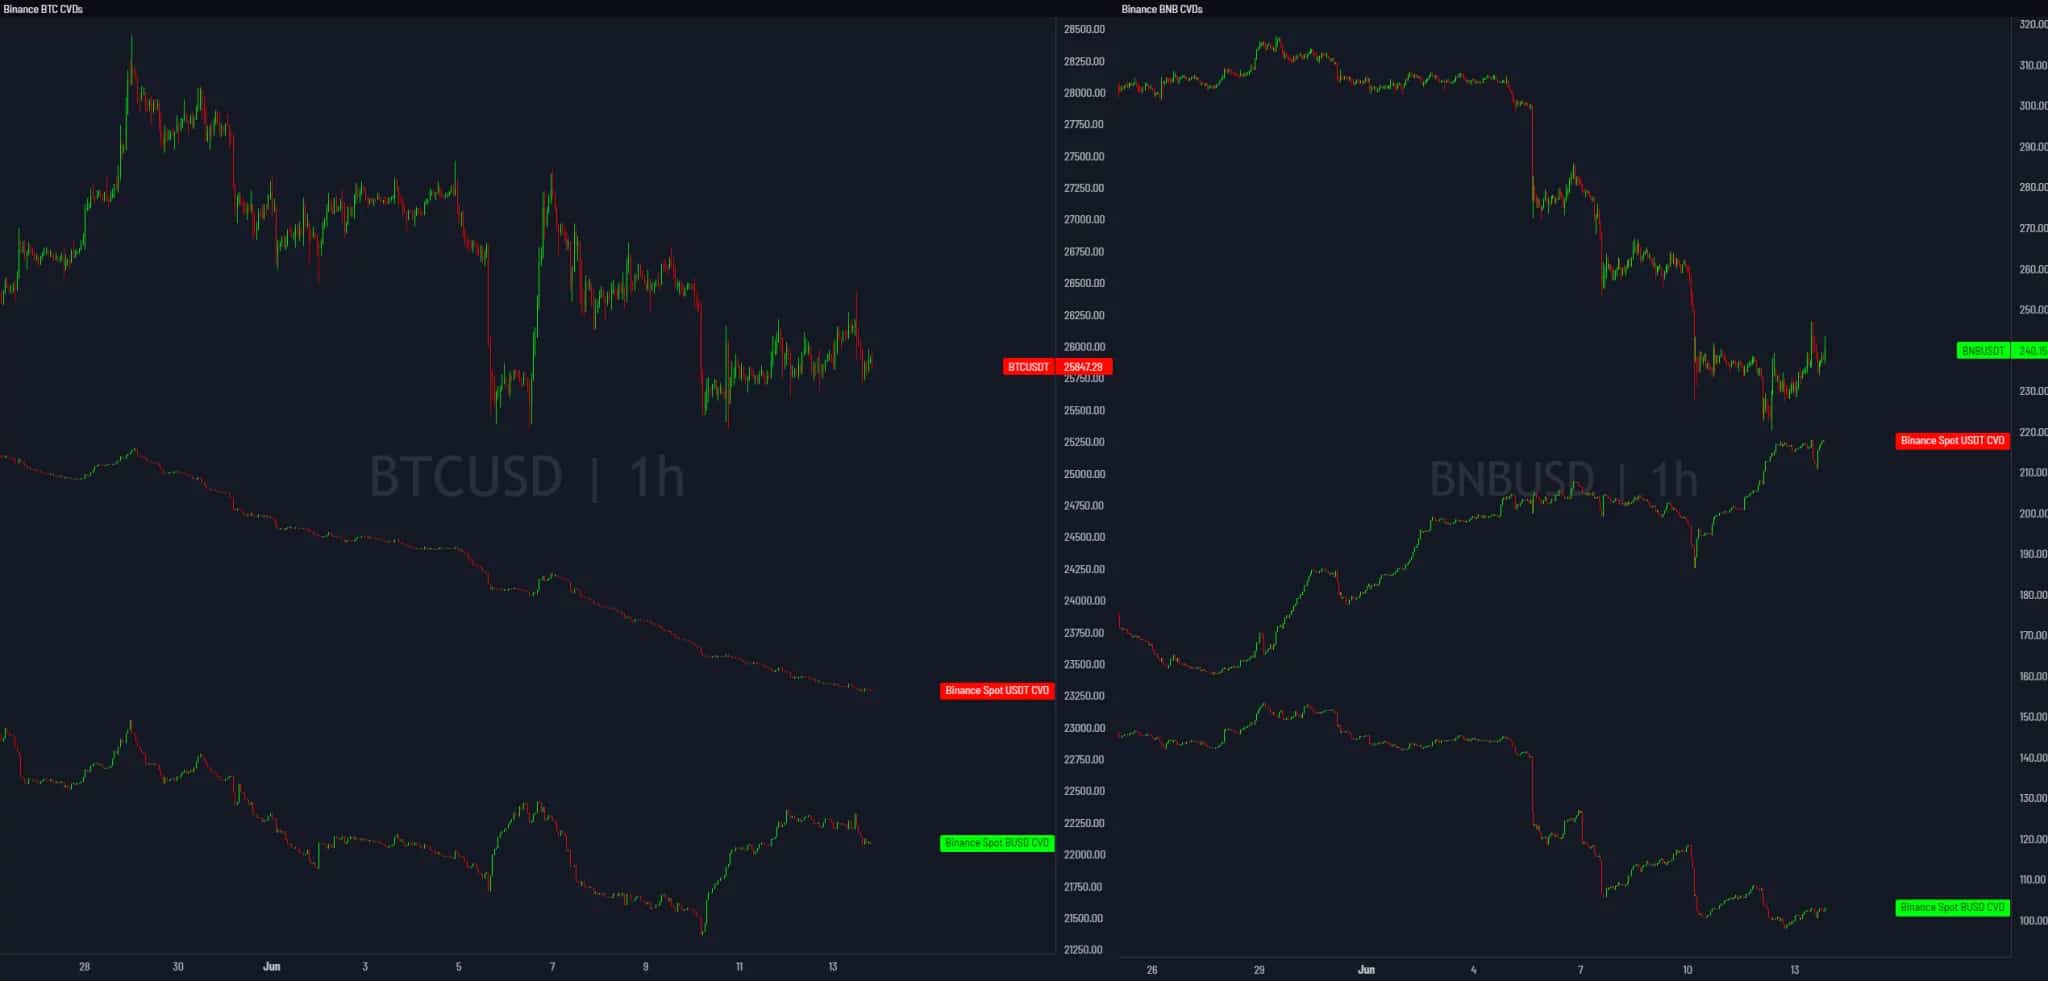 Figure 1: Comparison of BTC/USDT and BNB/USDT on different indicators and over the period 25 May - 13 June